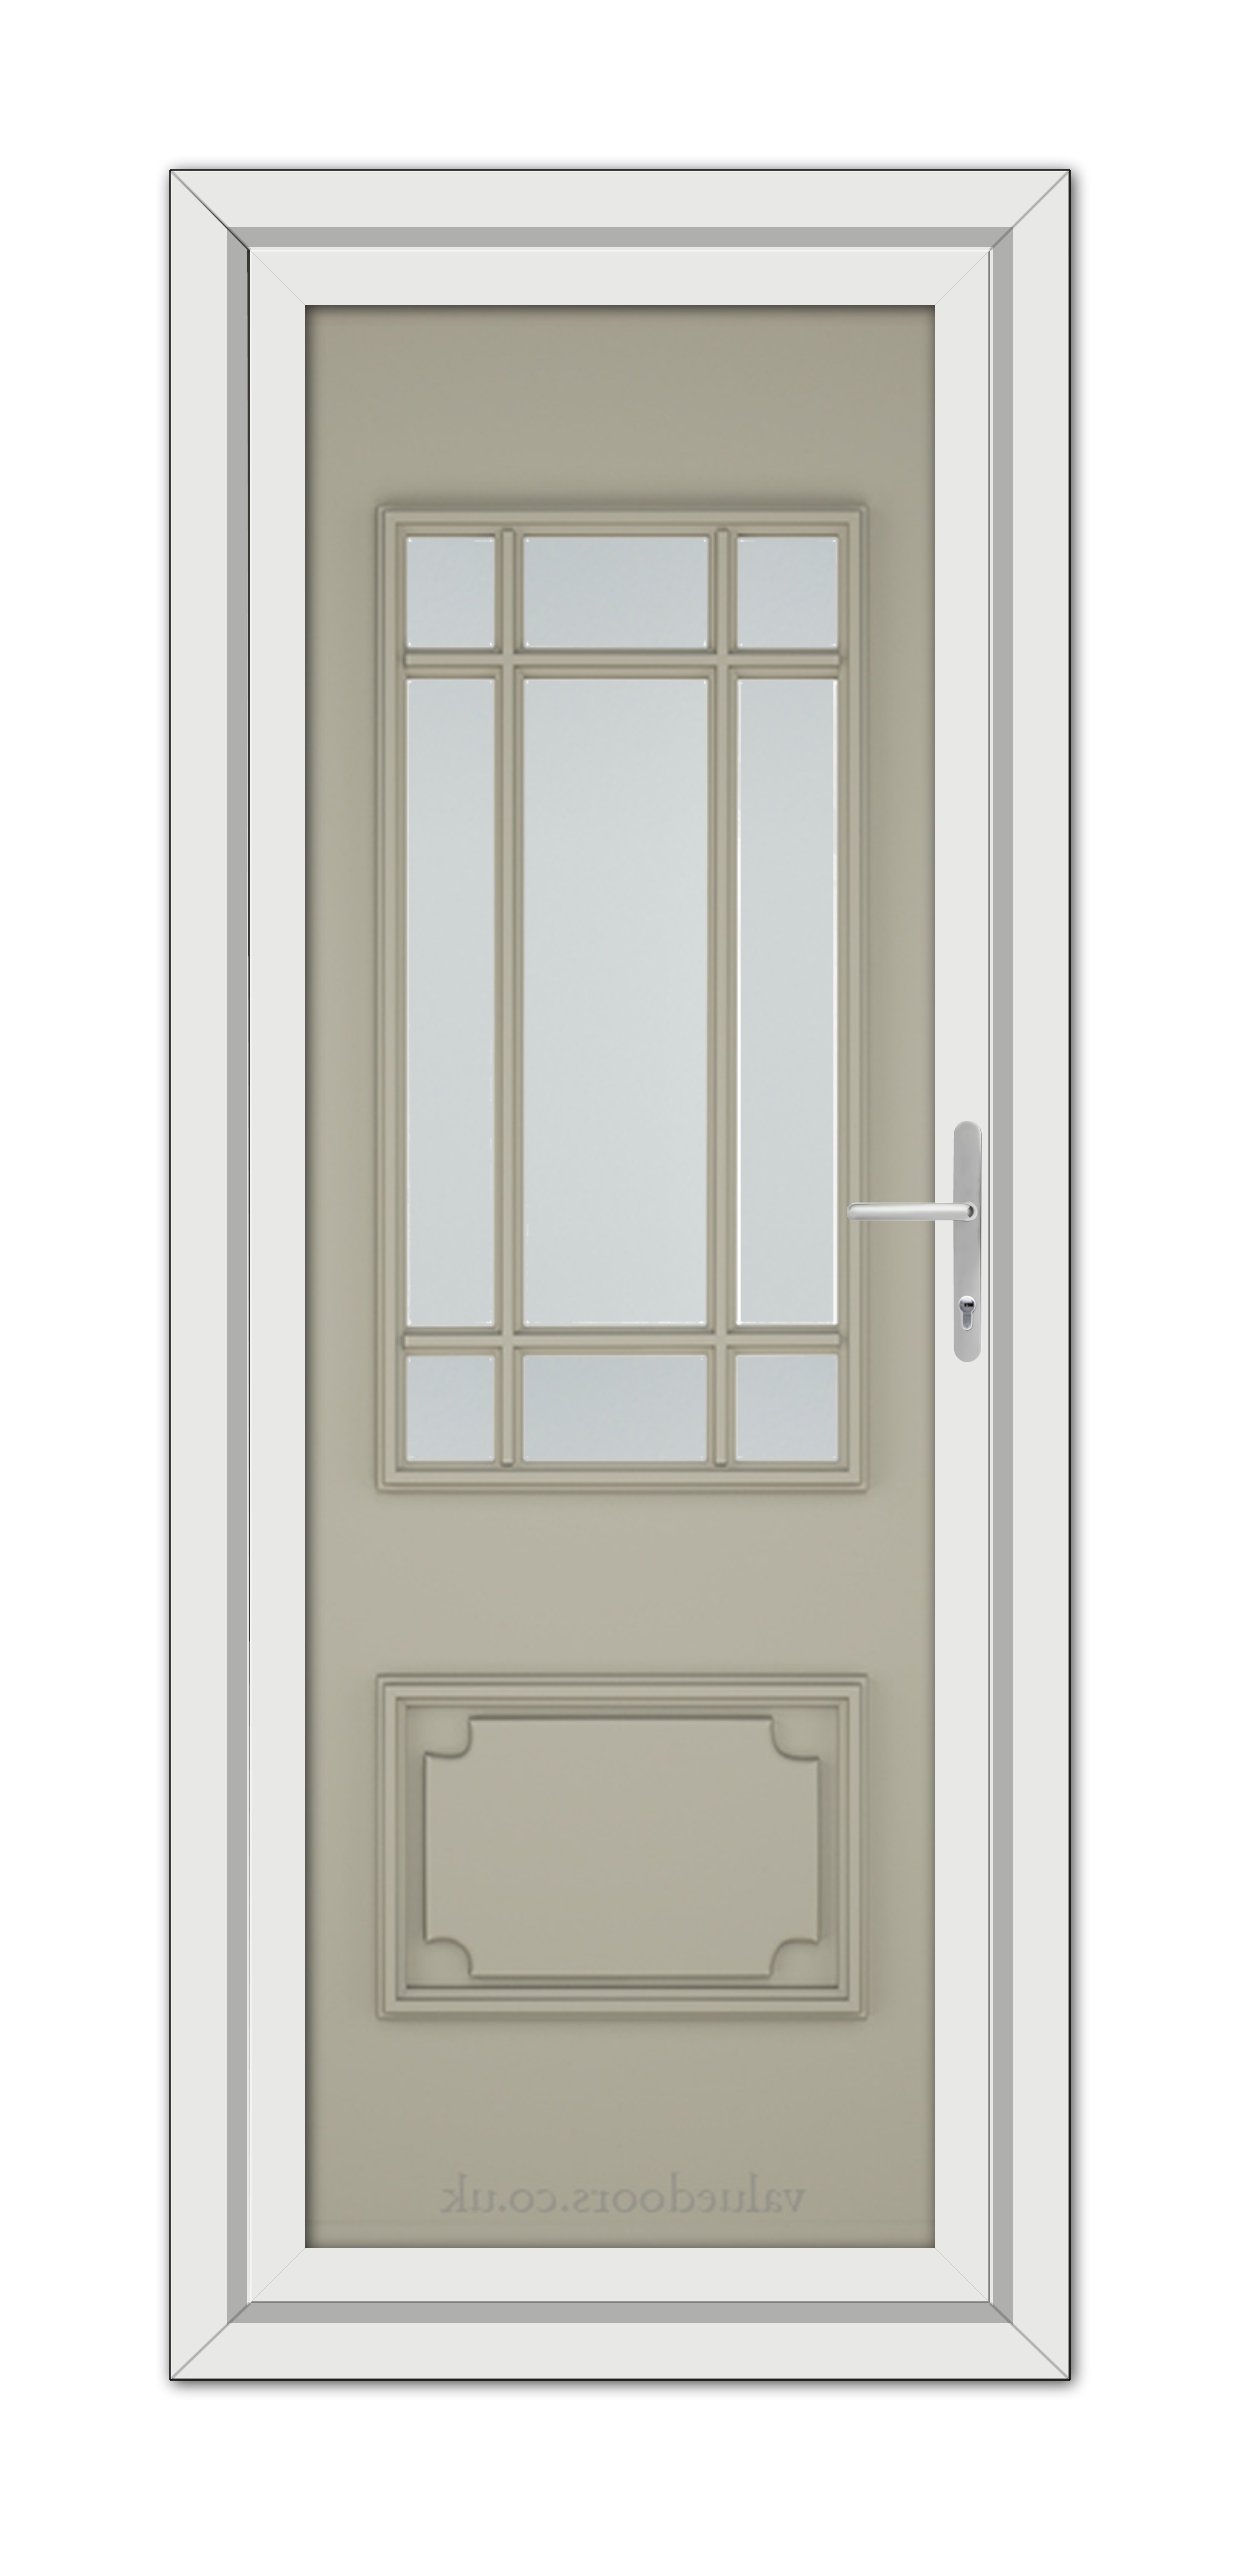 A modern Pebble Grey Seville uPVC door with a window composed of nine panes, equipped with a white handle, set within a white frame.